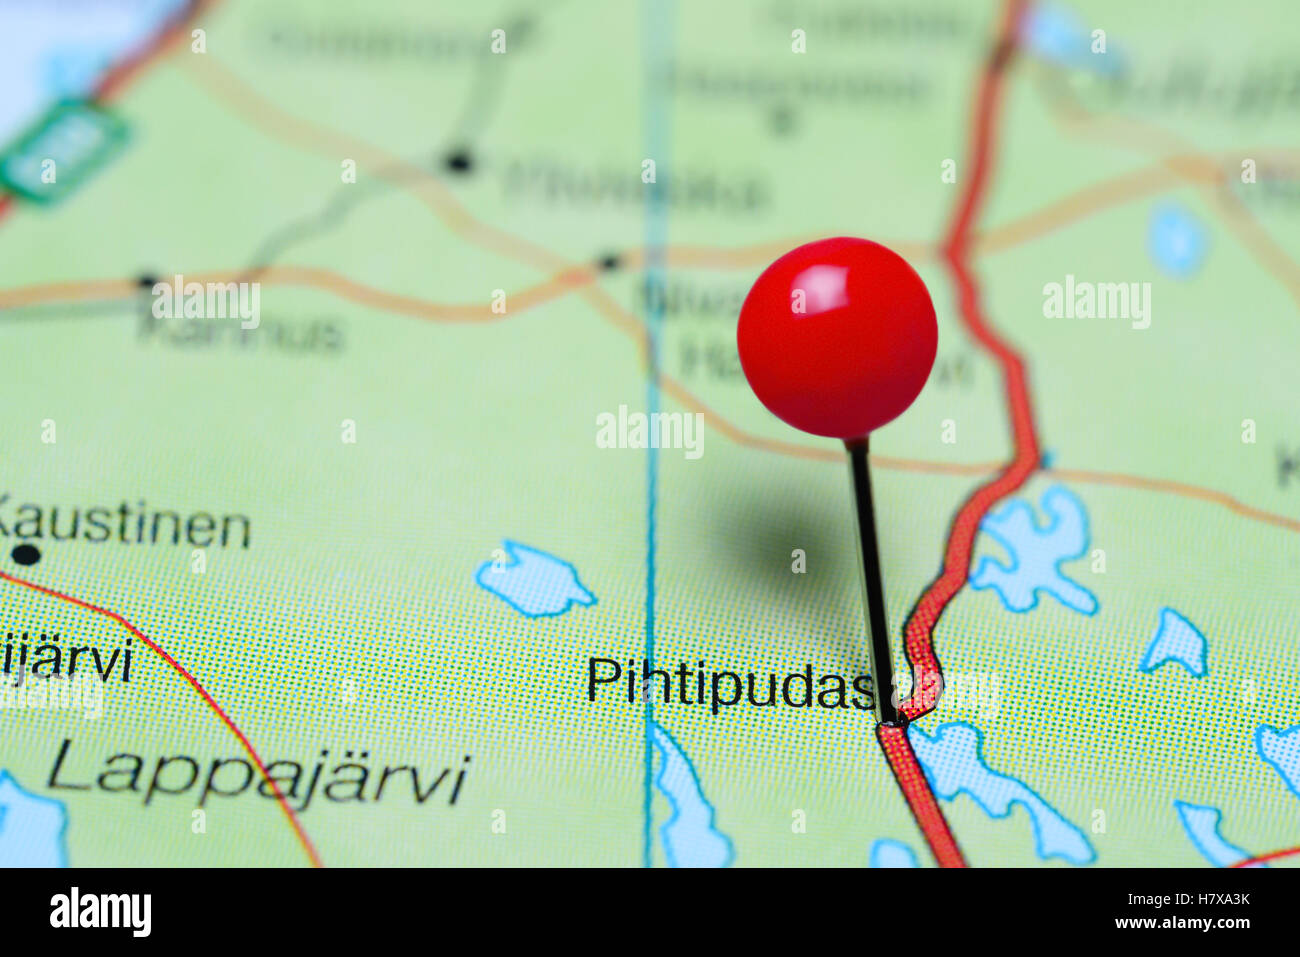 Pihtipudas pinned on a map of Finland Stock Photo